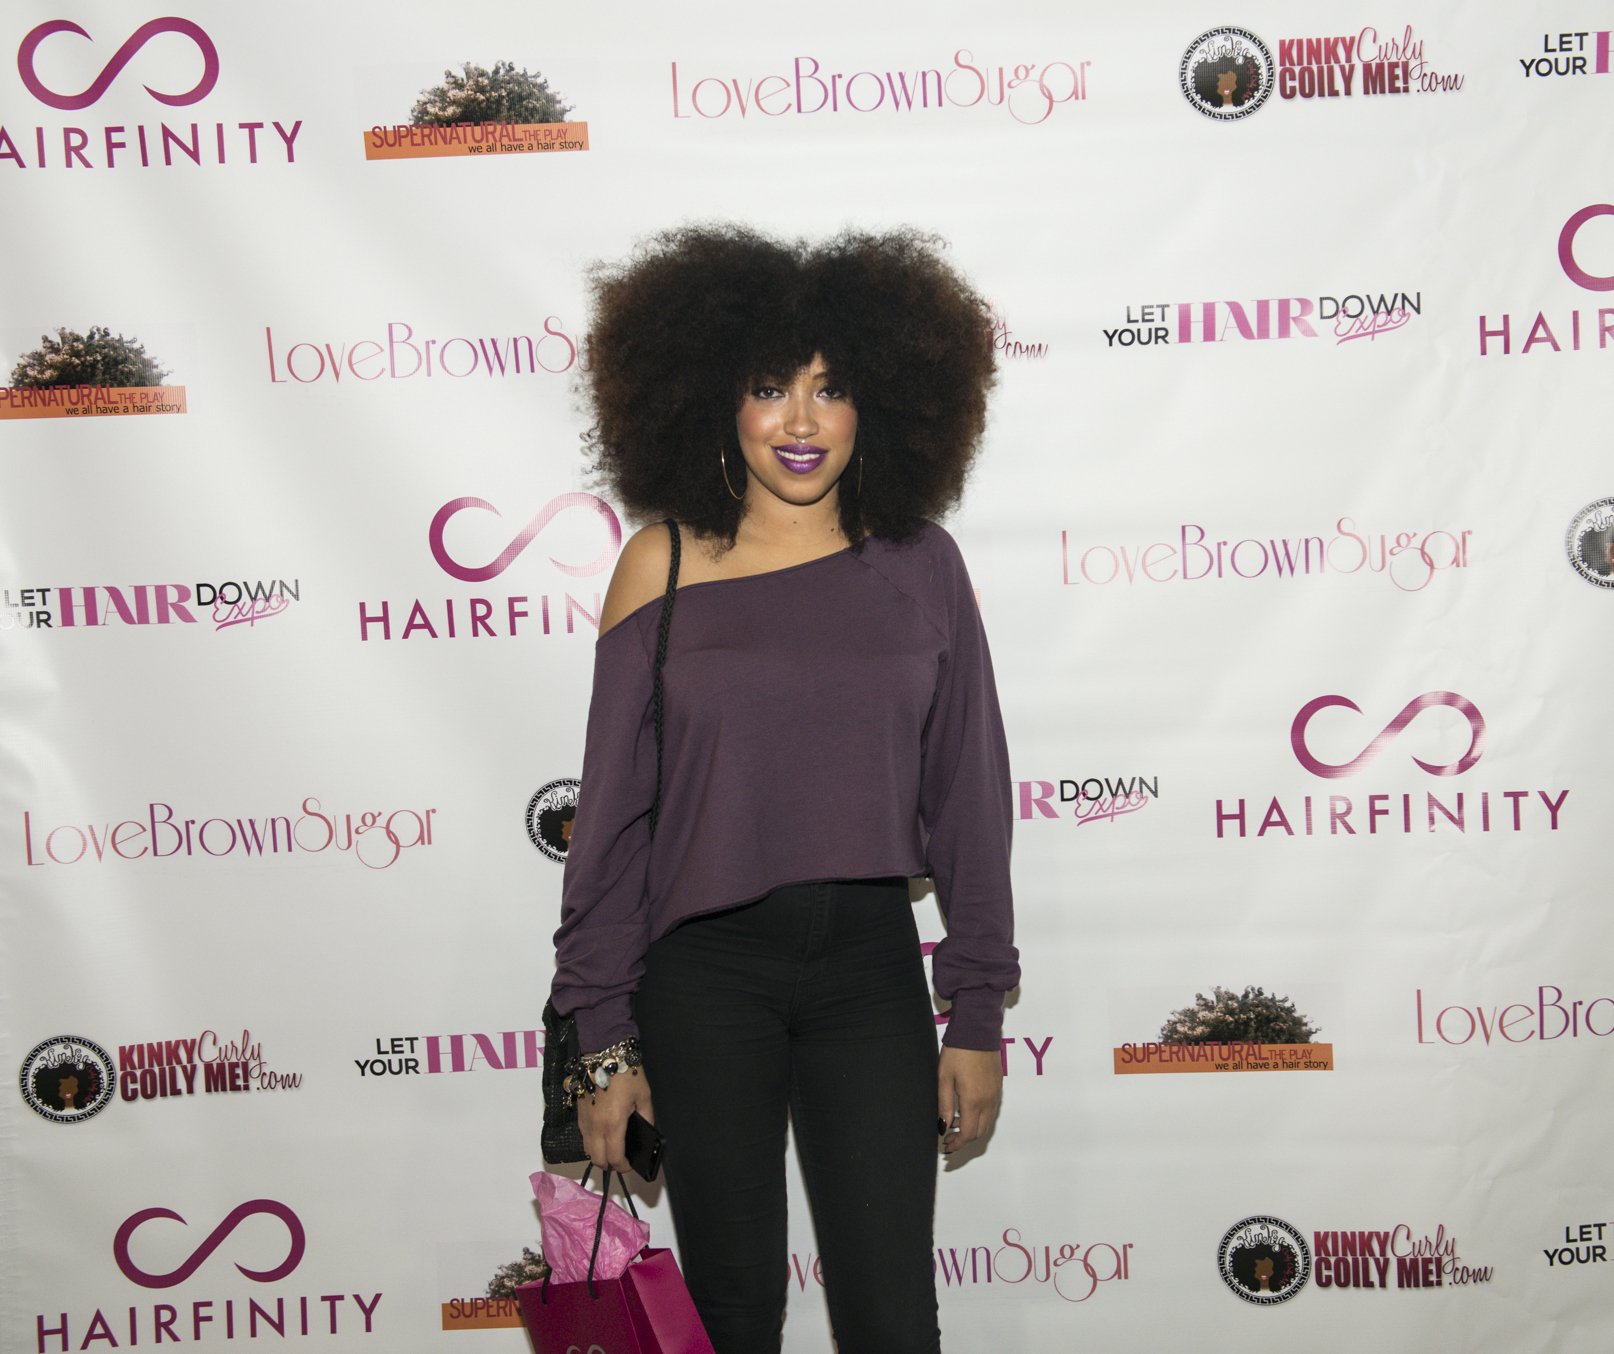 Natural hair blogger Taren Guy stopped by the Hairfinity booth to show her support at the LYHD Expo.